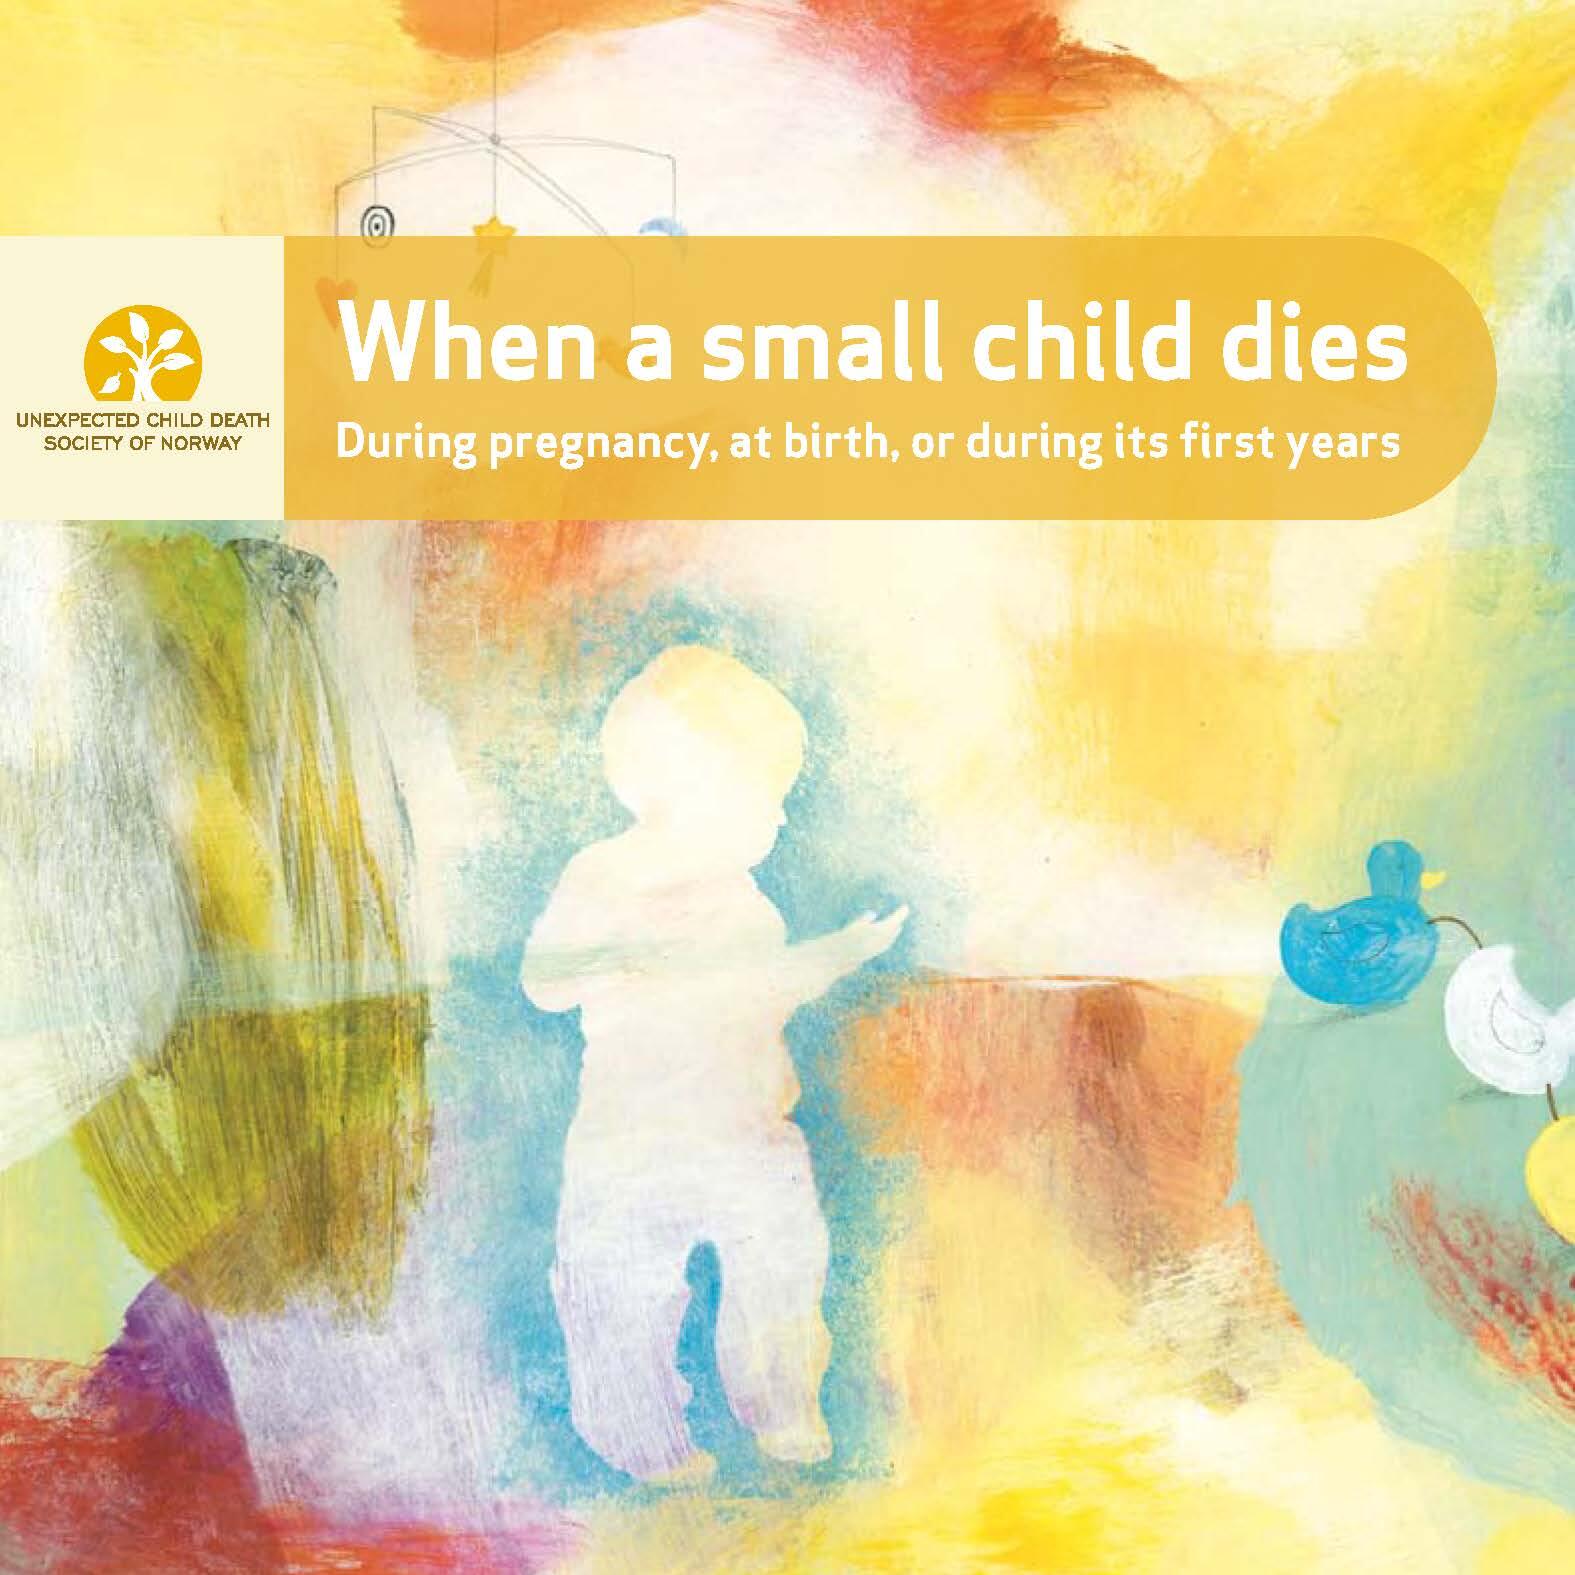 Front page "When a small child dies" - paining of the contour of a little boy 